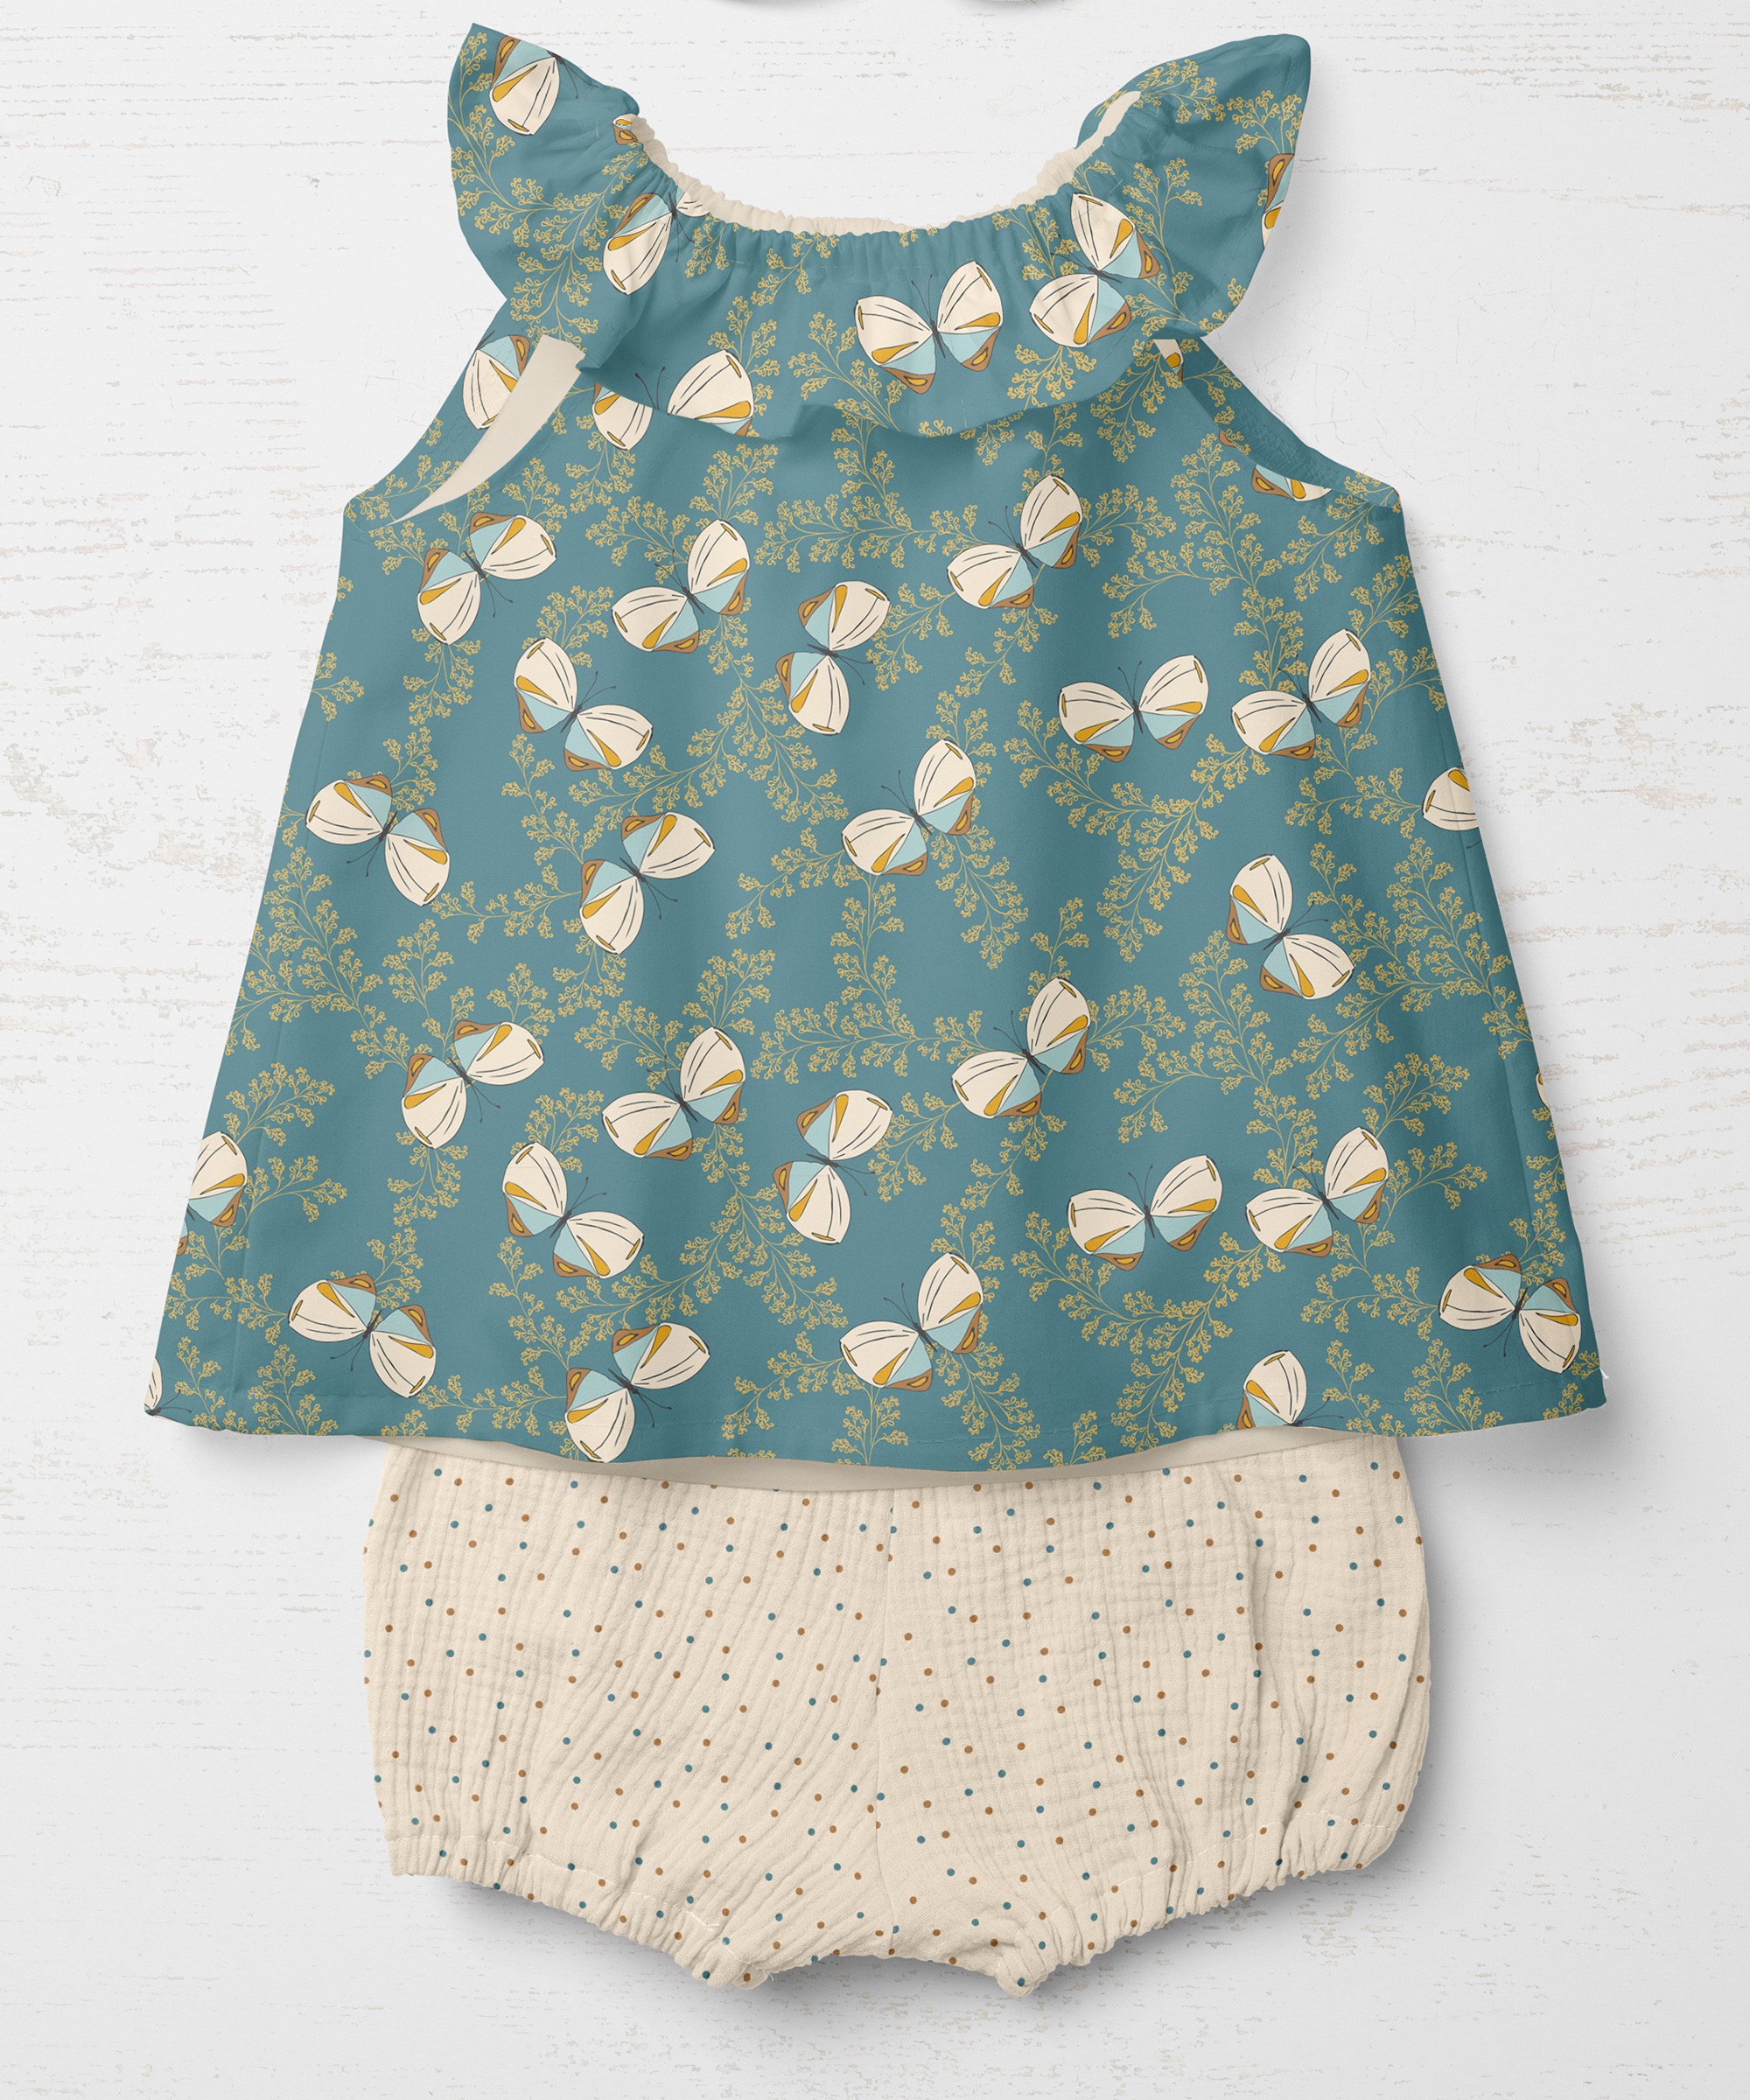 Baby top and shorts with butterflies pattern in teal